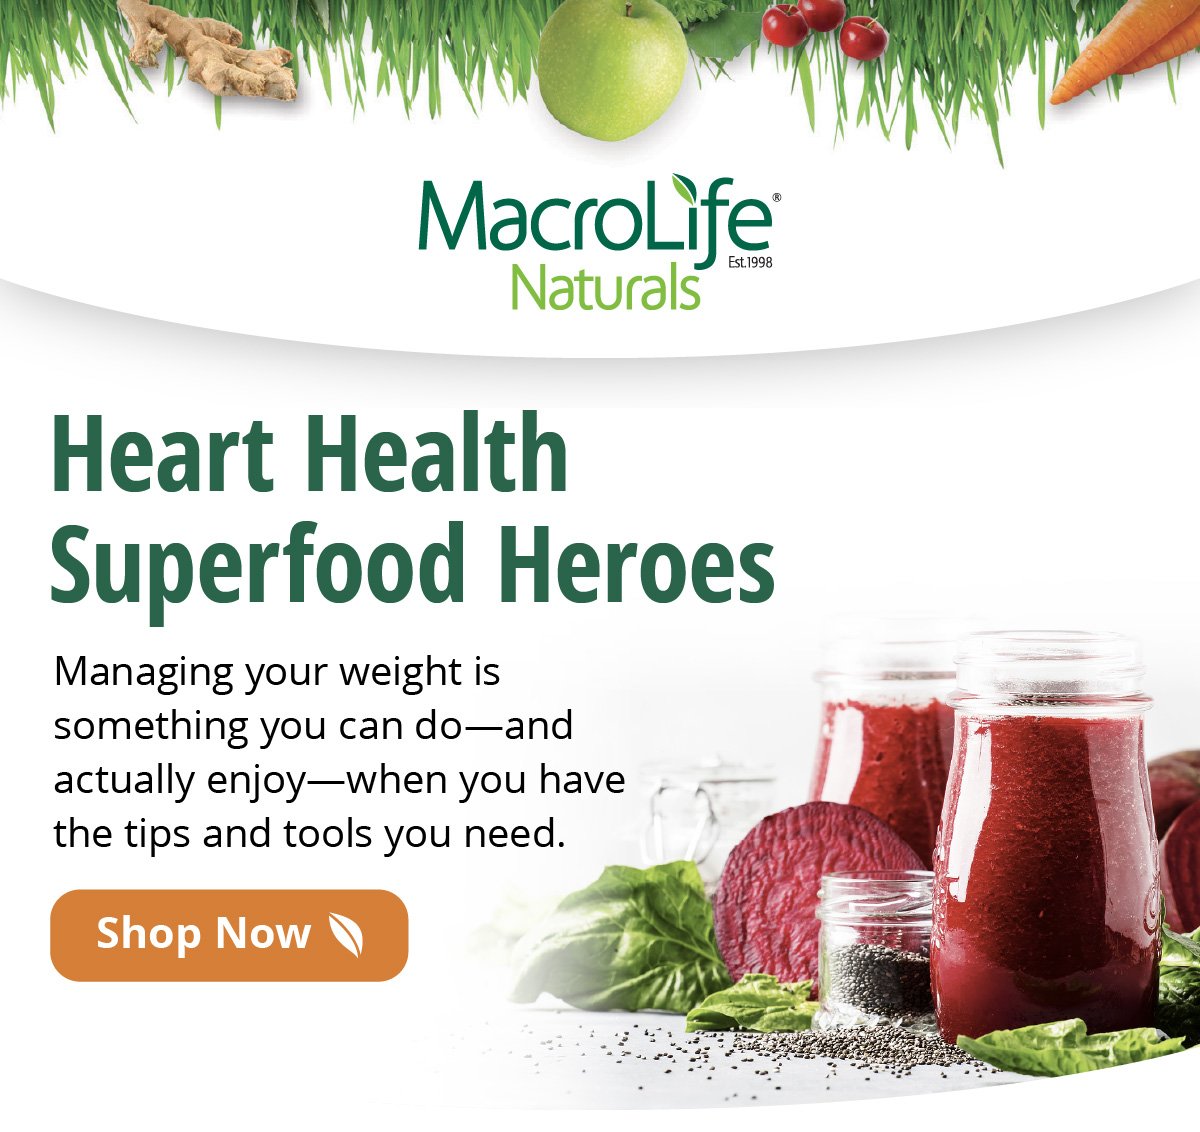 Heart Health Superfood Heroes | Managing your weight is something you can do—and actually enjoy—when you have the tips and tools you need. | Shop Now